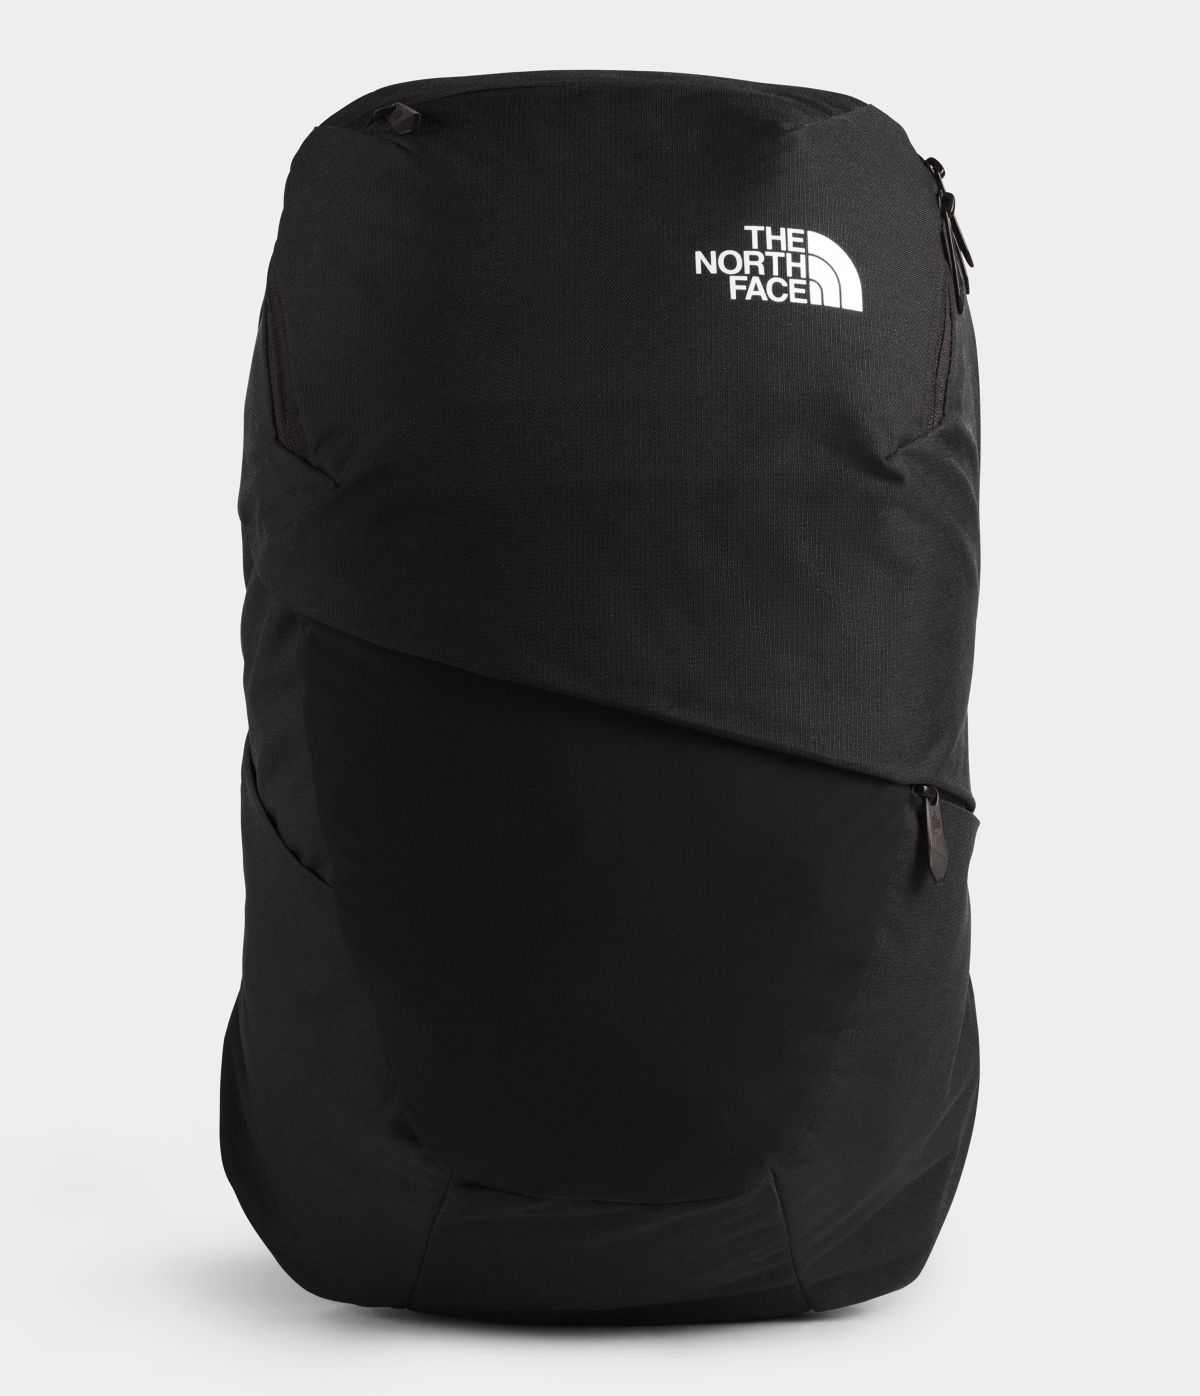 Women's The North Face Aurora Backpack in TNF Black Heather/TNF White from front view